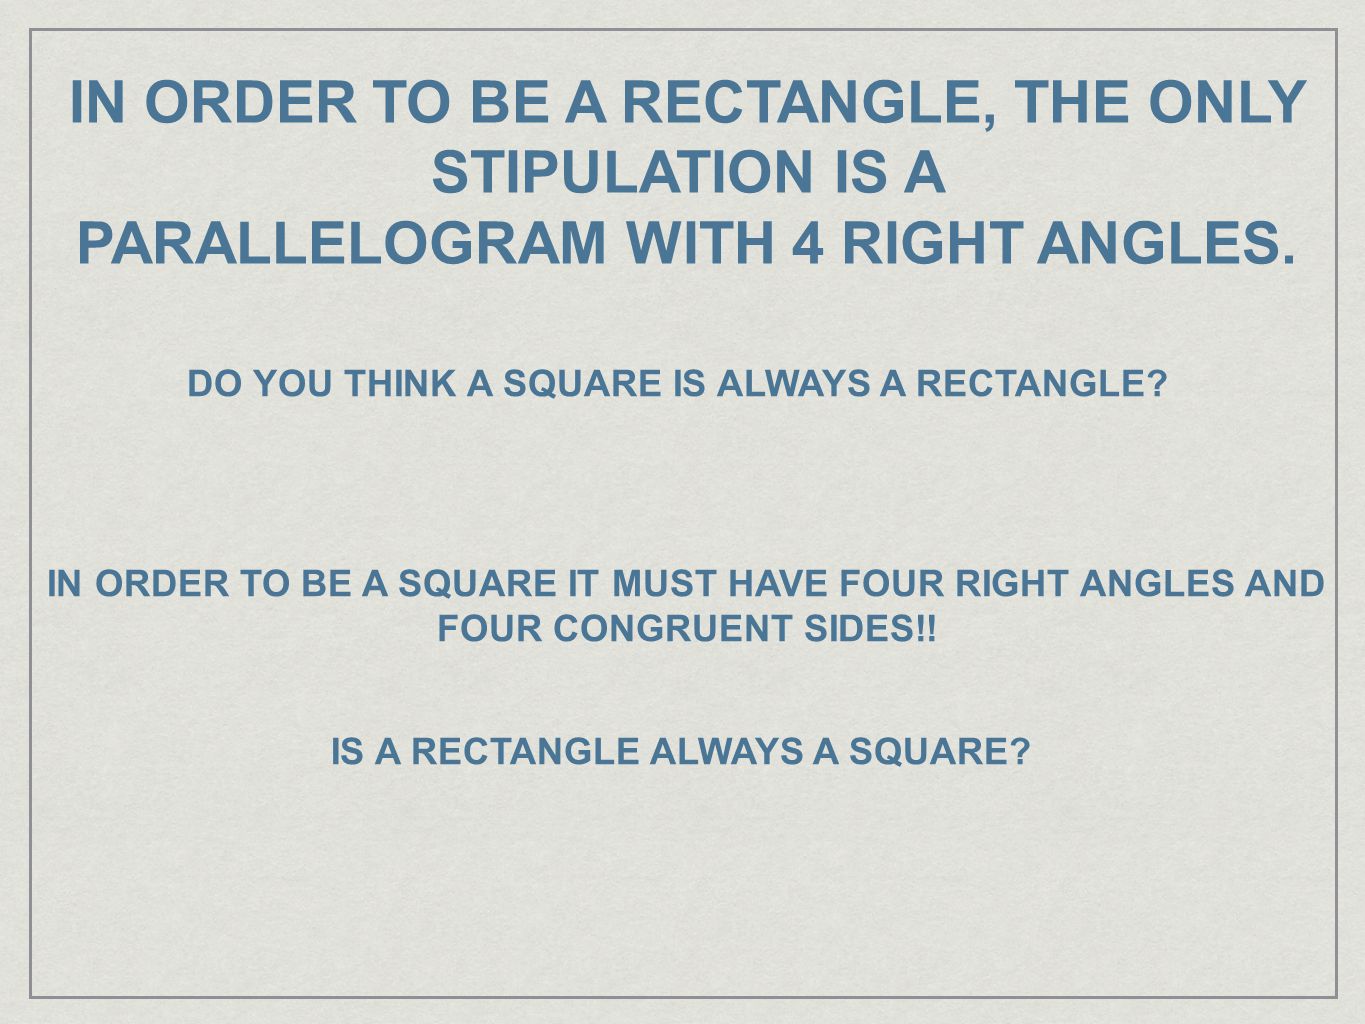 IN ORDER TO BE A RECTANGLE, THE ONLY STIPULATION IS A PARALLELOGRAM WITH 4 RIGHT ANGLES.